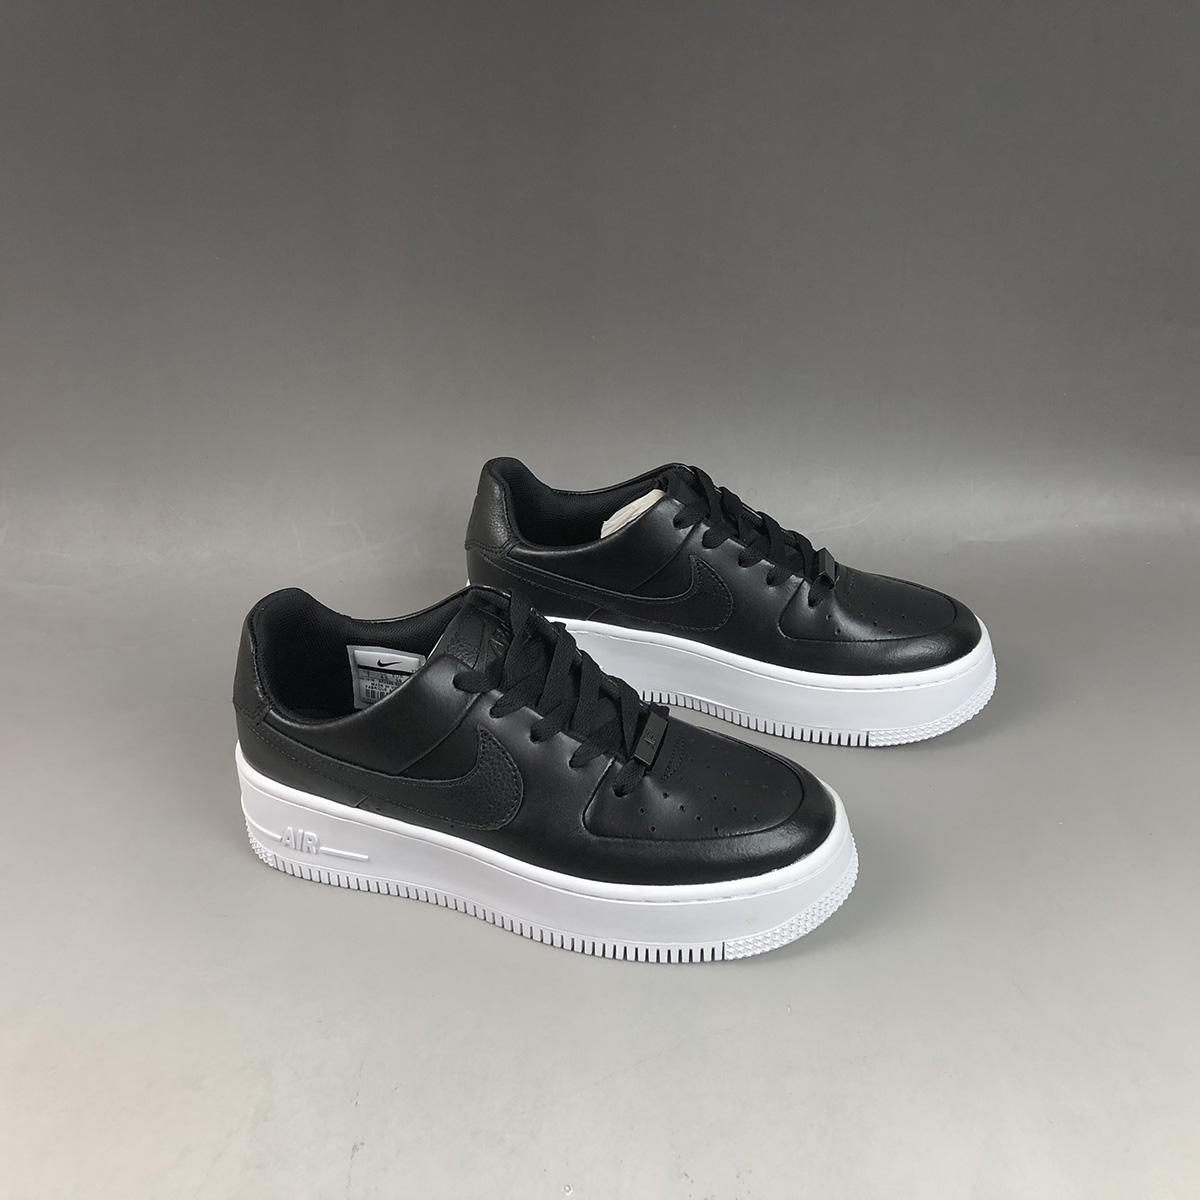 Nike Air Force 1 Sage Black/White For Sale – The Sole Line